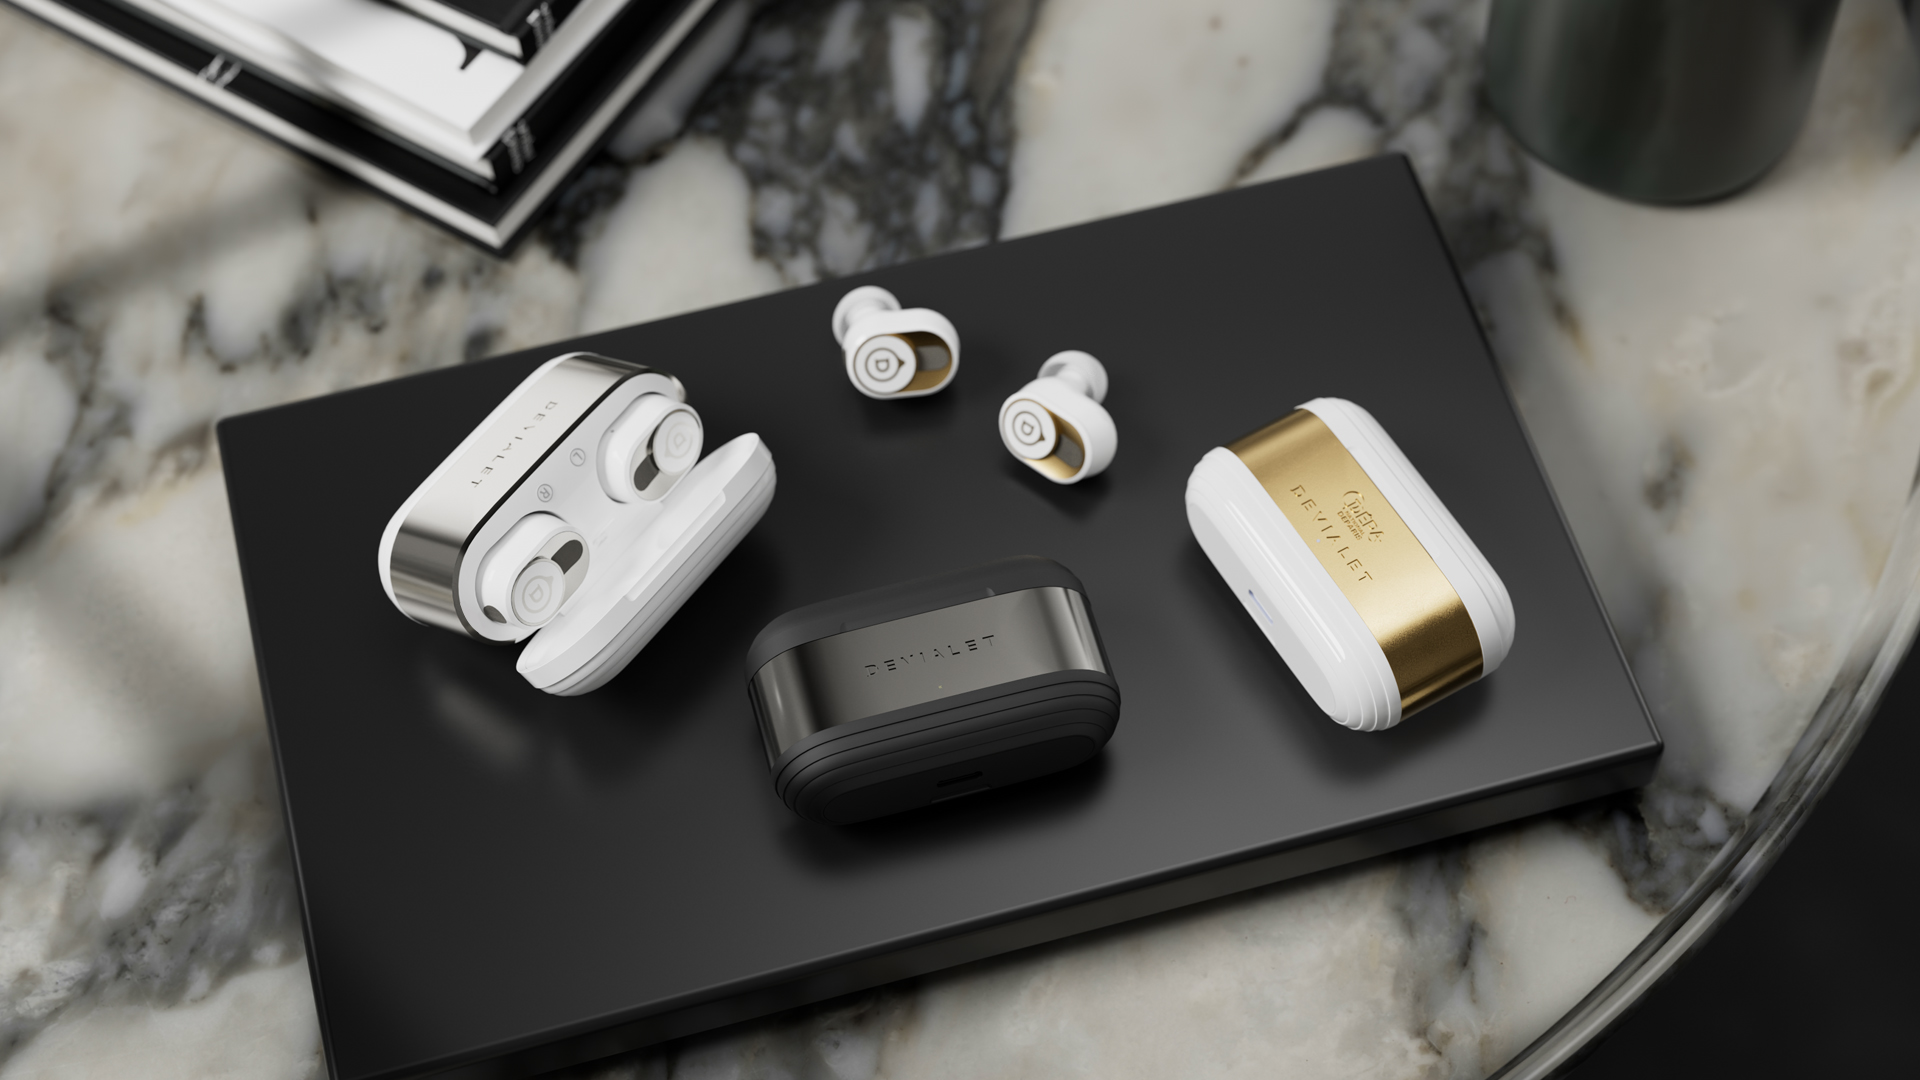 Devialet launches a new pair of high-end wireless earbuds